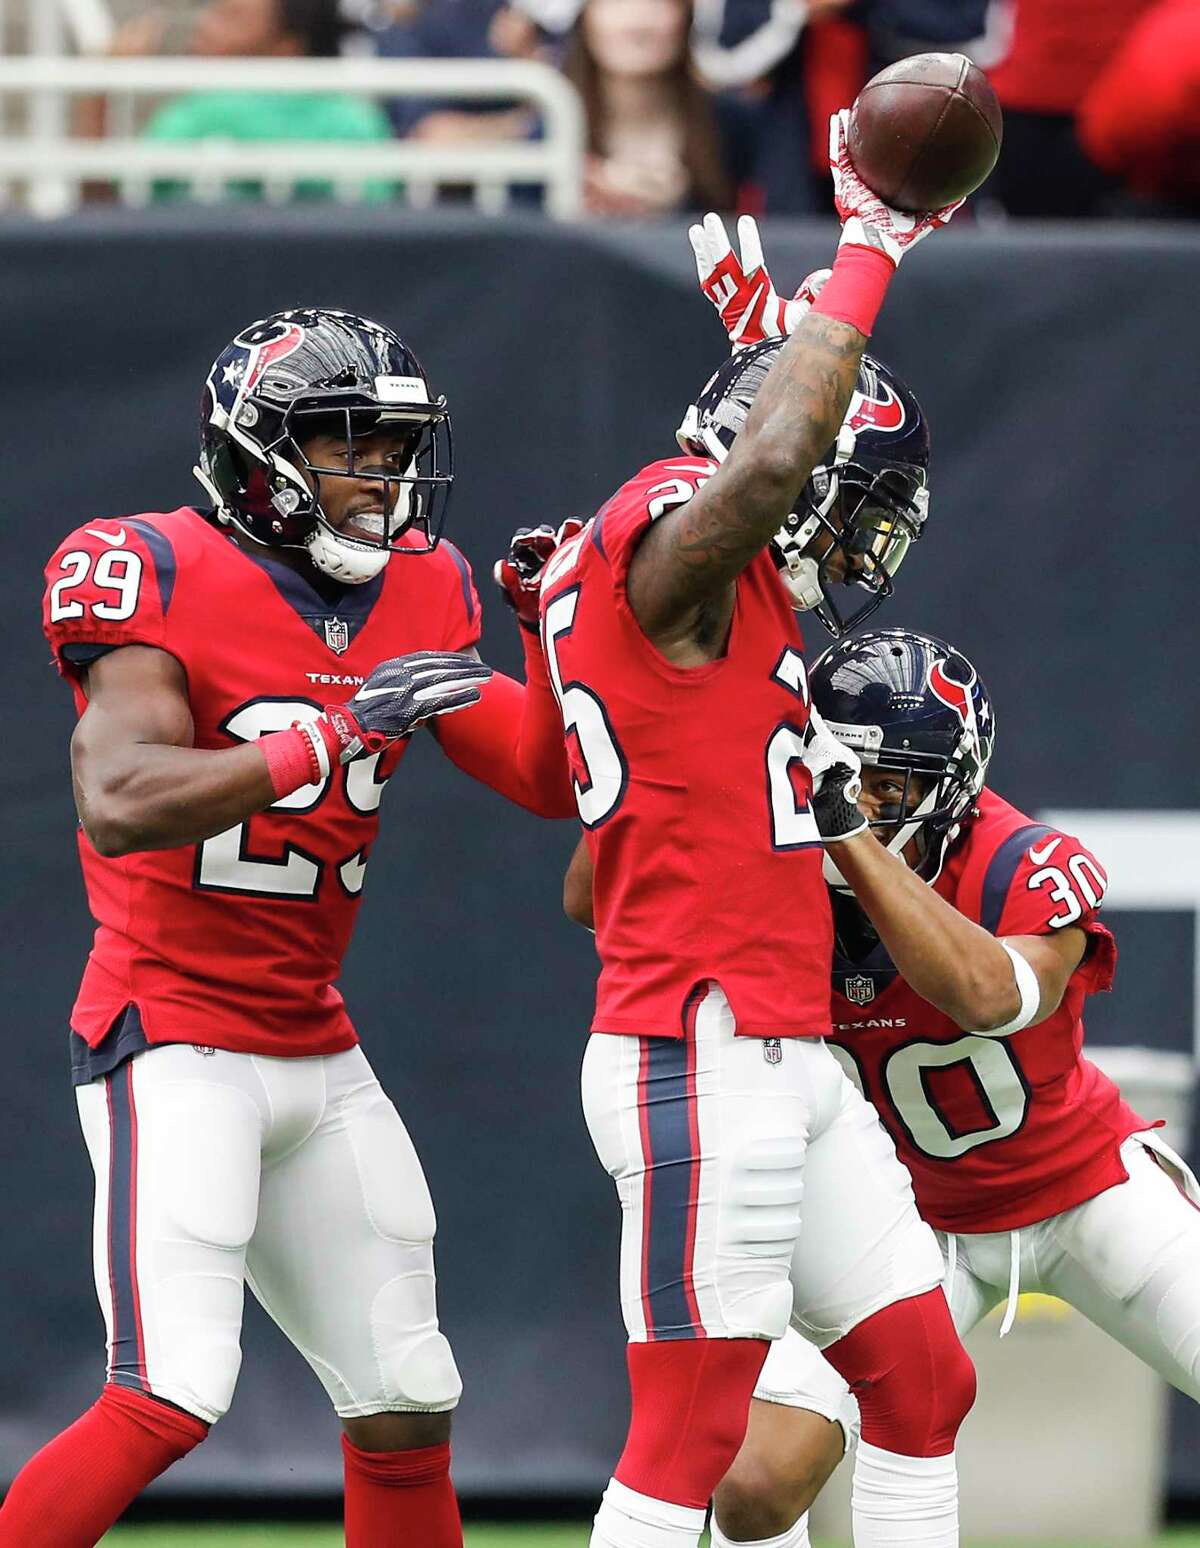 Houston Texans defensive backs Kareem Jackson (25), Andre Hal (29) and Kevin Johnson (30) celebrate Jackson's interception of a pass by San Francisco 49ers quarterback Jimmy Garoppolo during the first quarter of an NFL football game at NRG Stadium on Sunday, Dec. 10, 2017, in Houston.